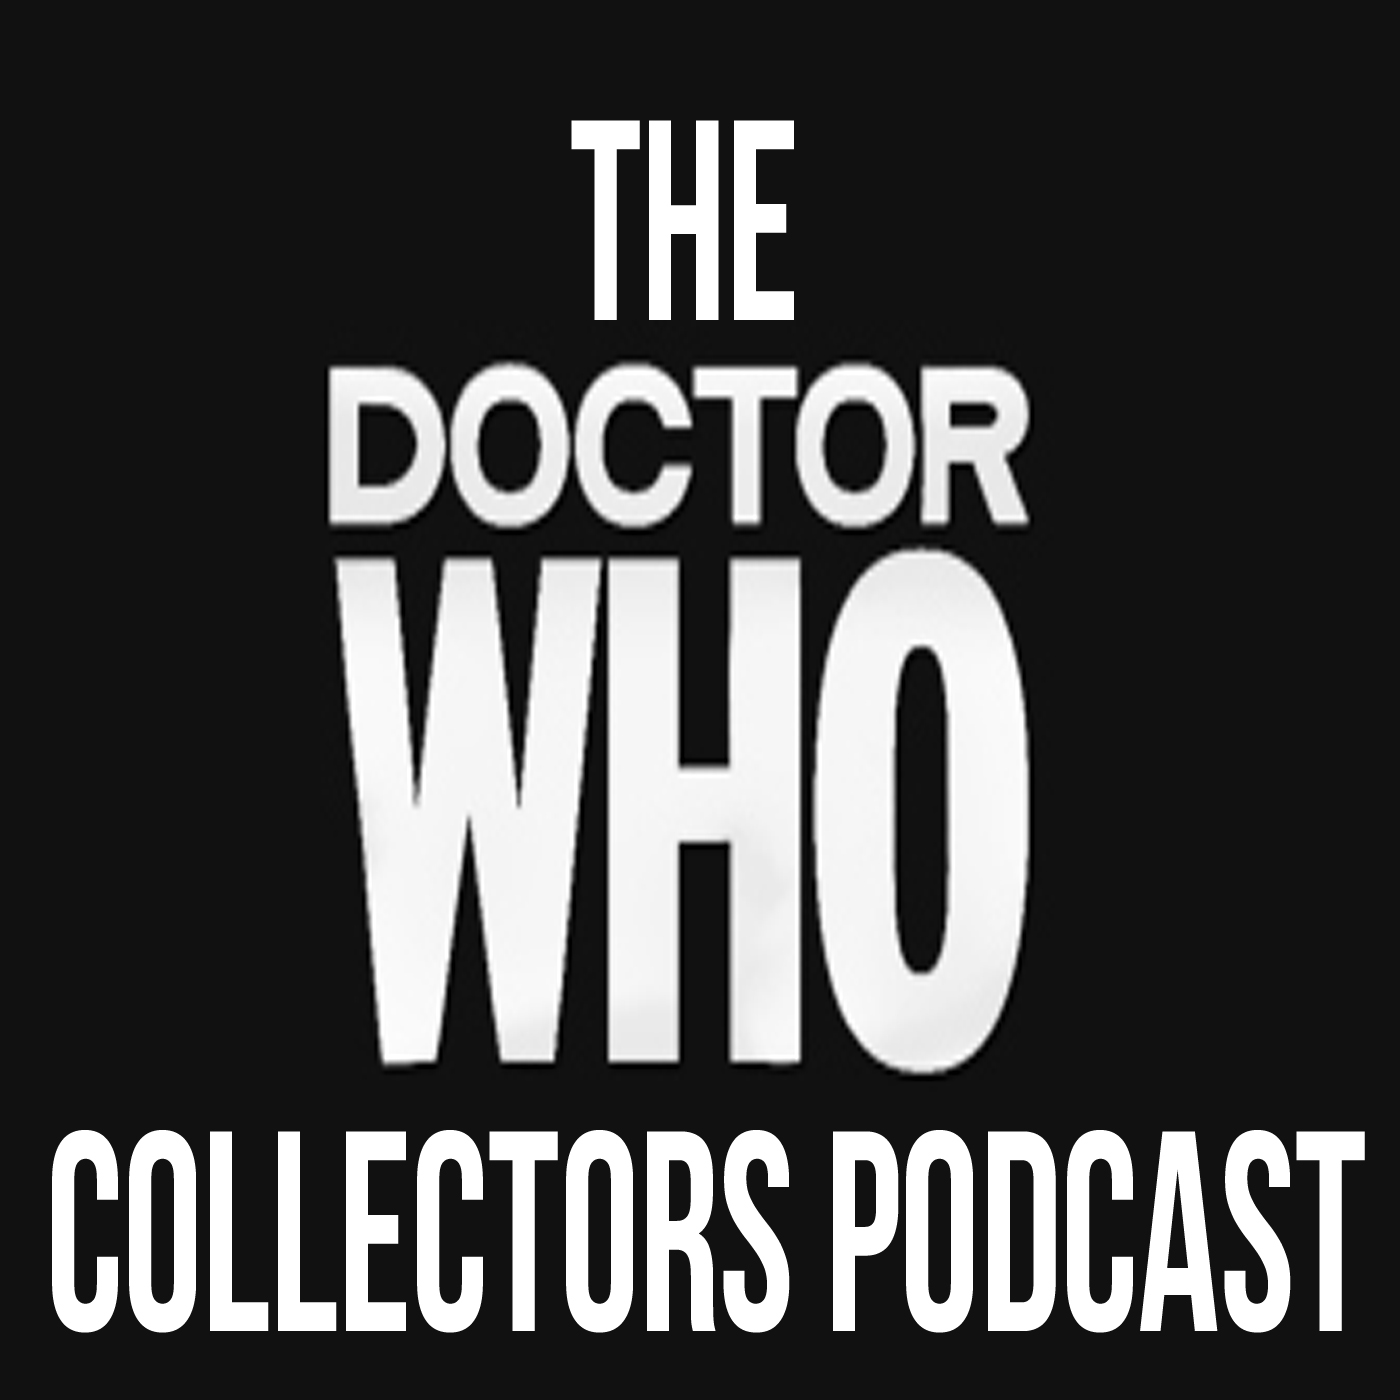 Thumbnail for Episode 5 – Doctor Who on Pinnacle: Collectible or waste of time?